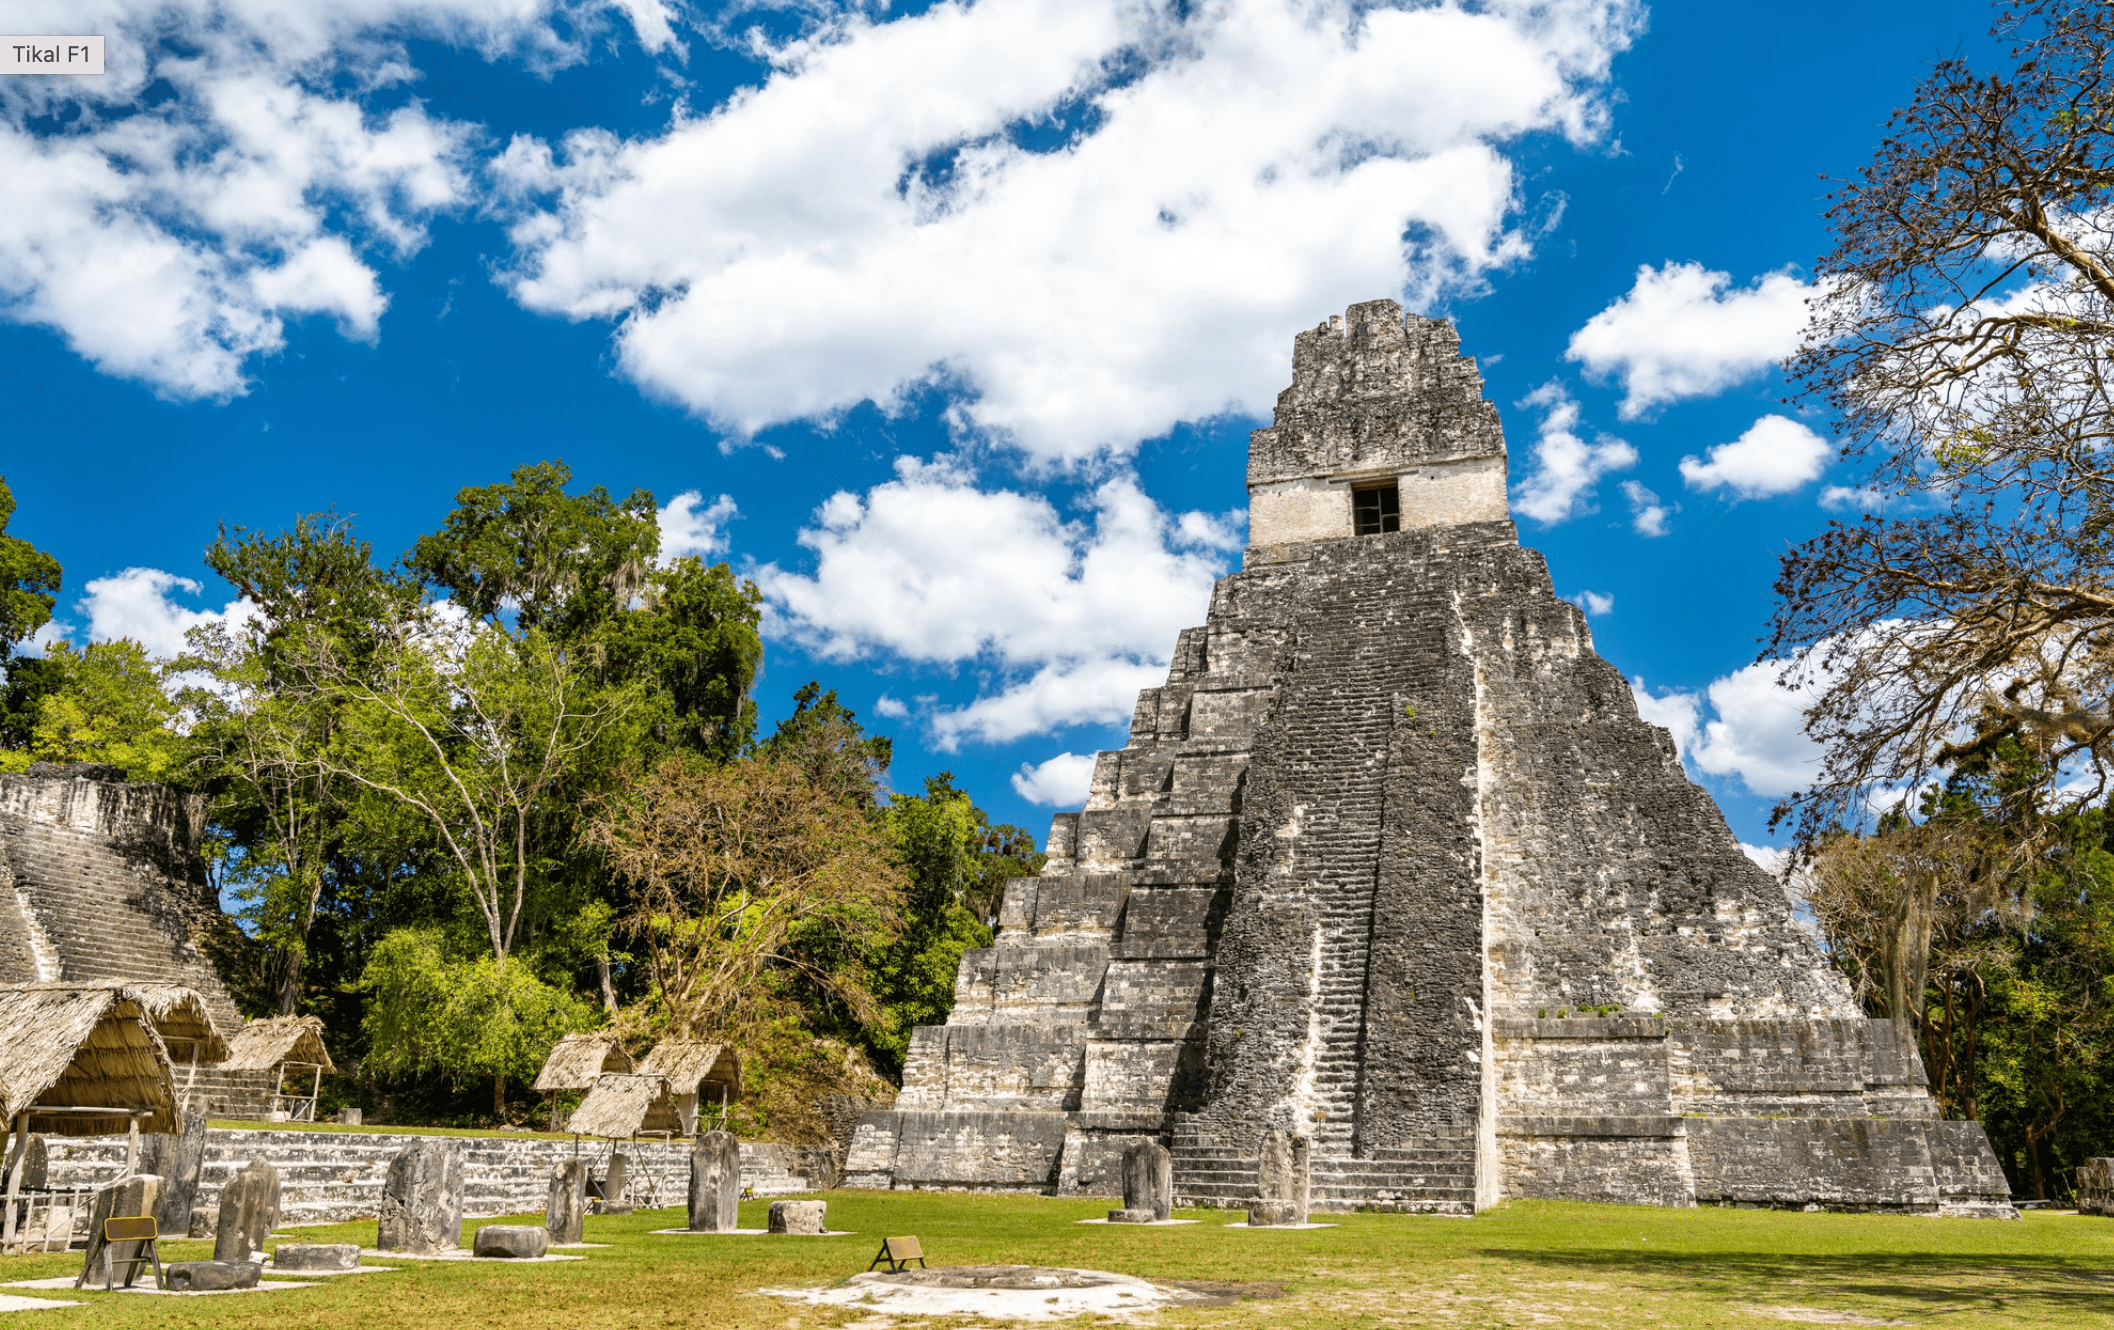 Grand plaza and temple 2 at the Tikal national park, a UNESCO World Heritage Site. 